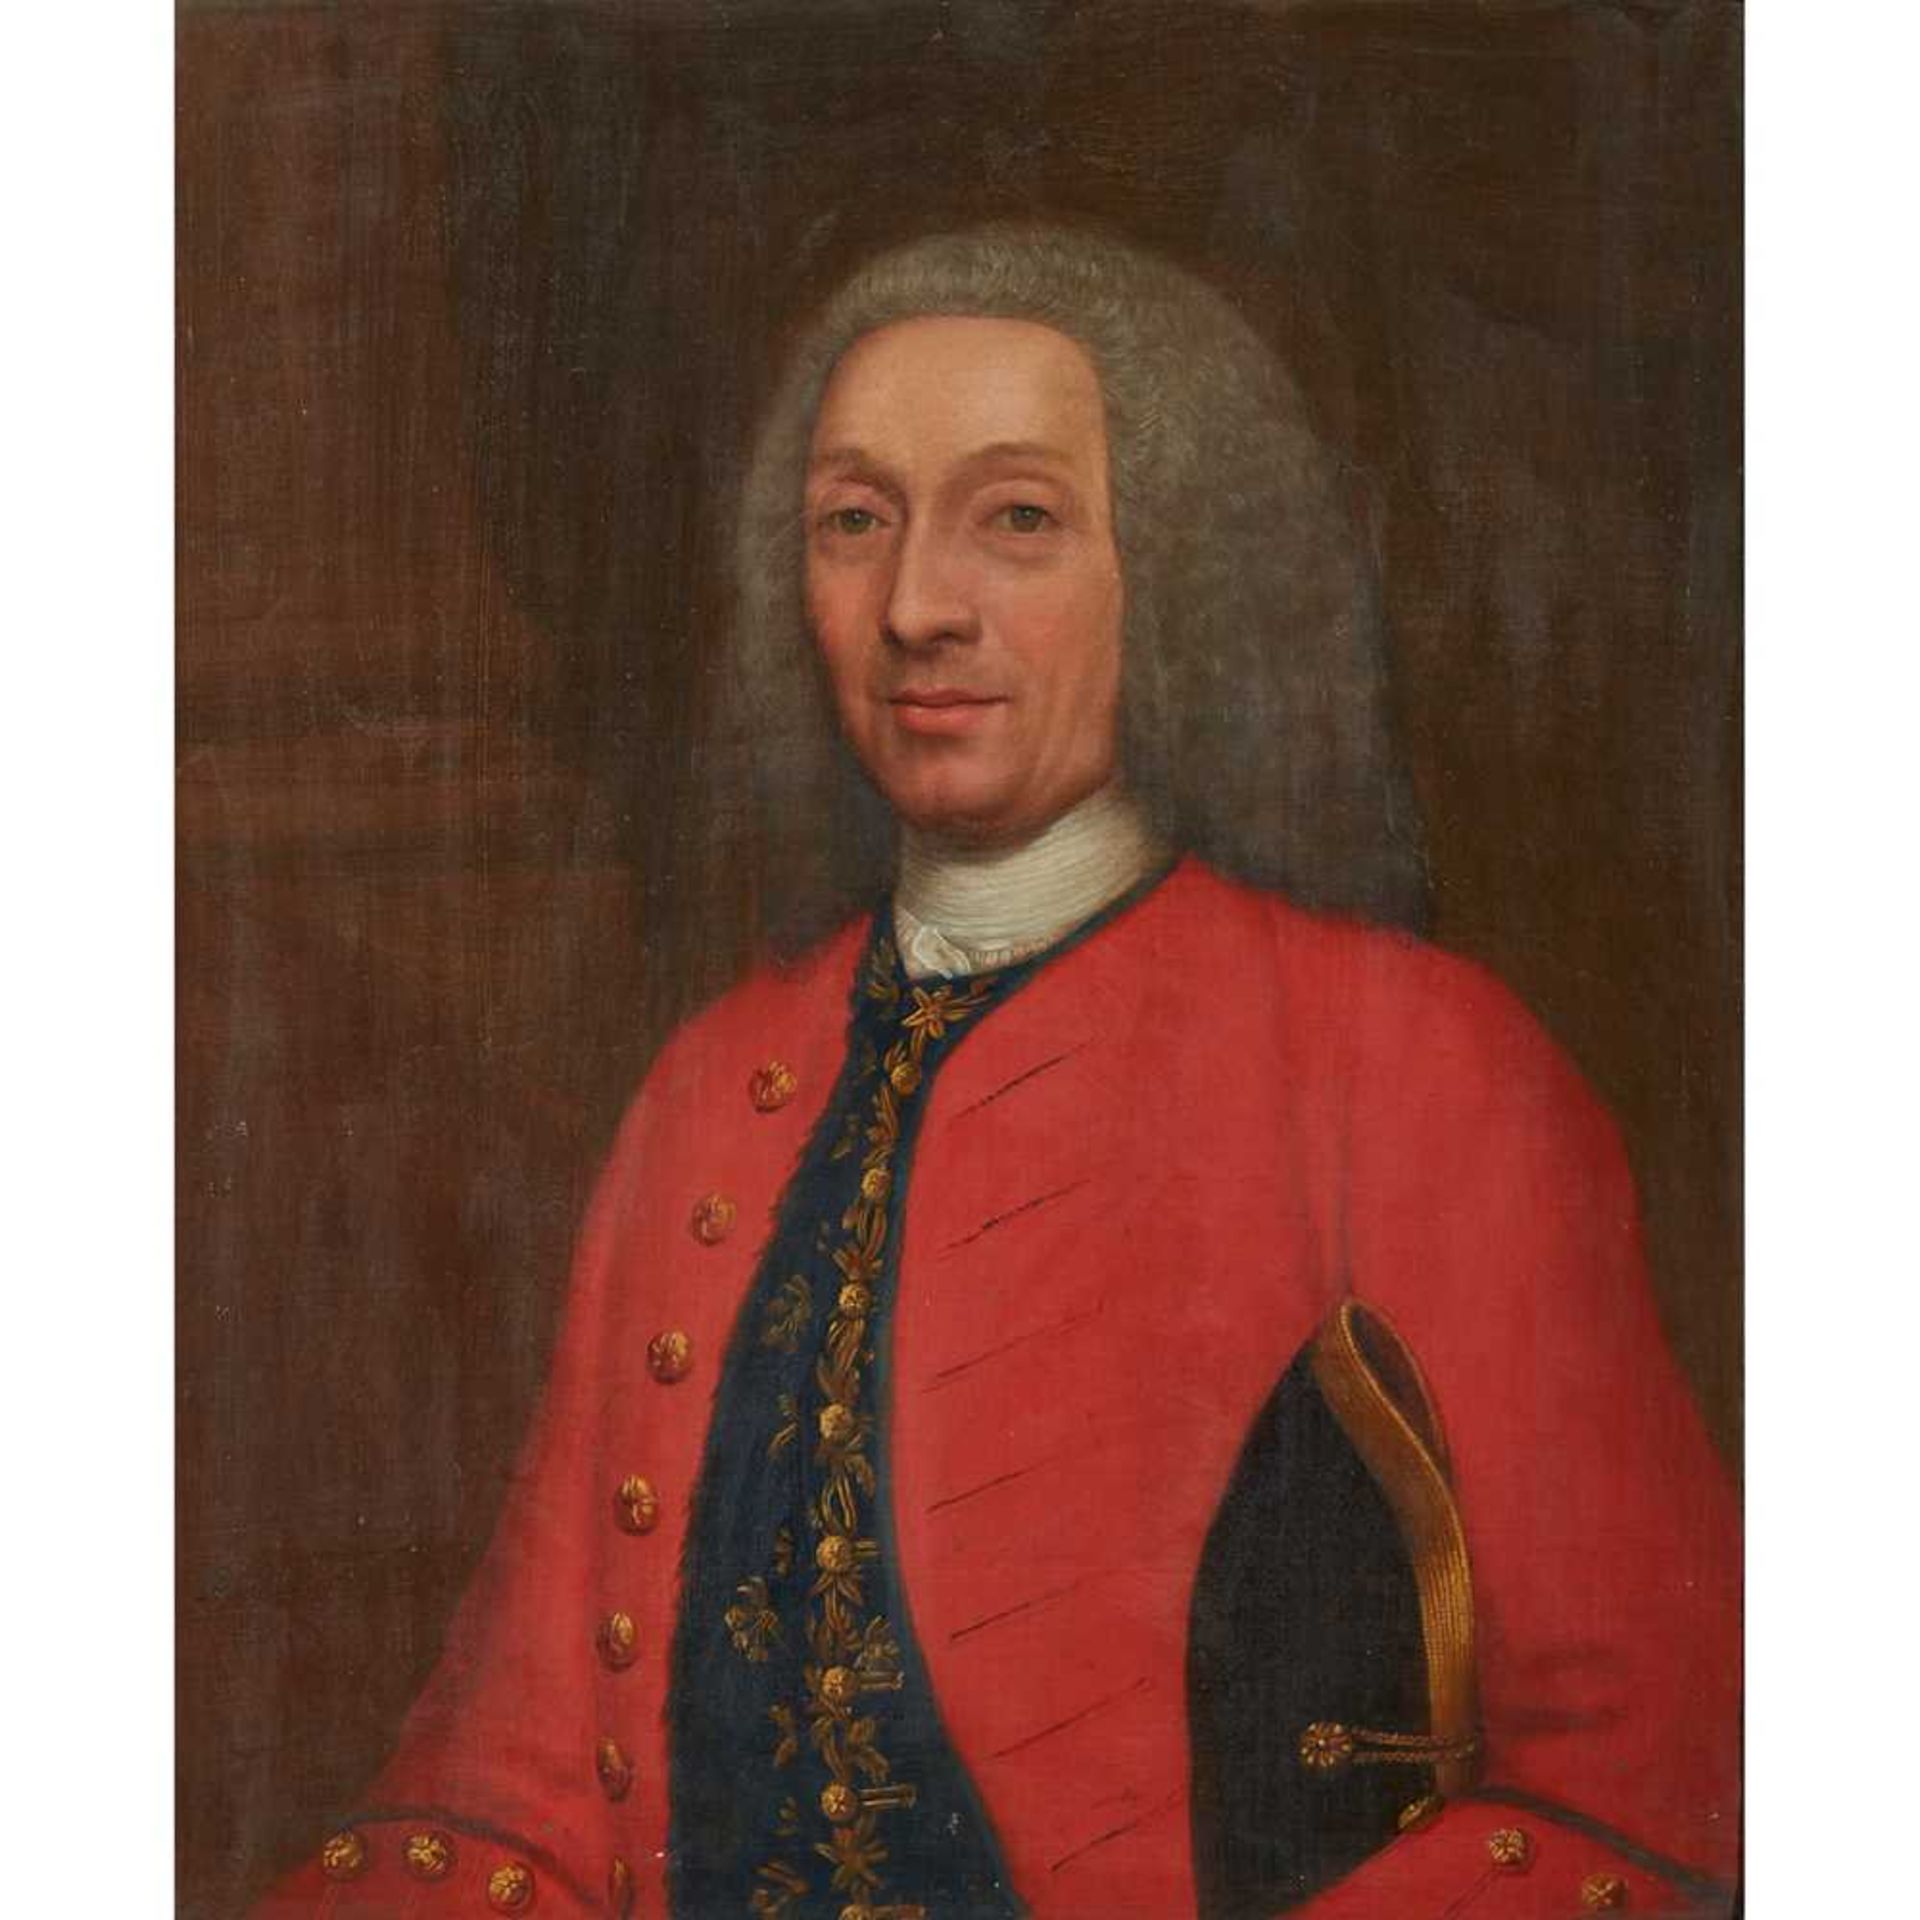 ATTRIBUTED TO JOHN B. ALEXANDER PORTRAIT OF THE 7TH EARL OF GALLOWAY